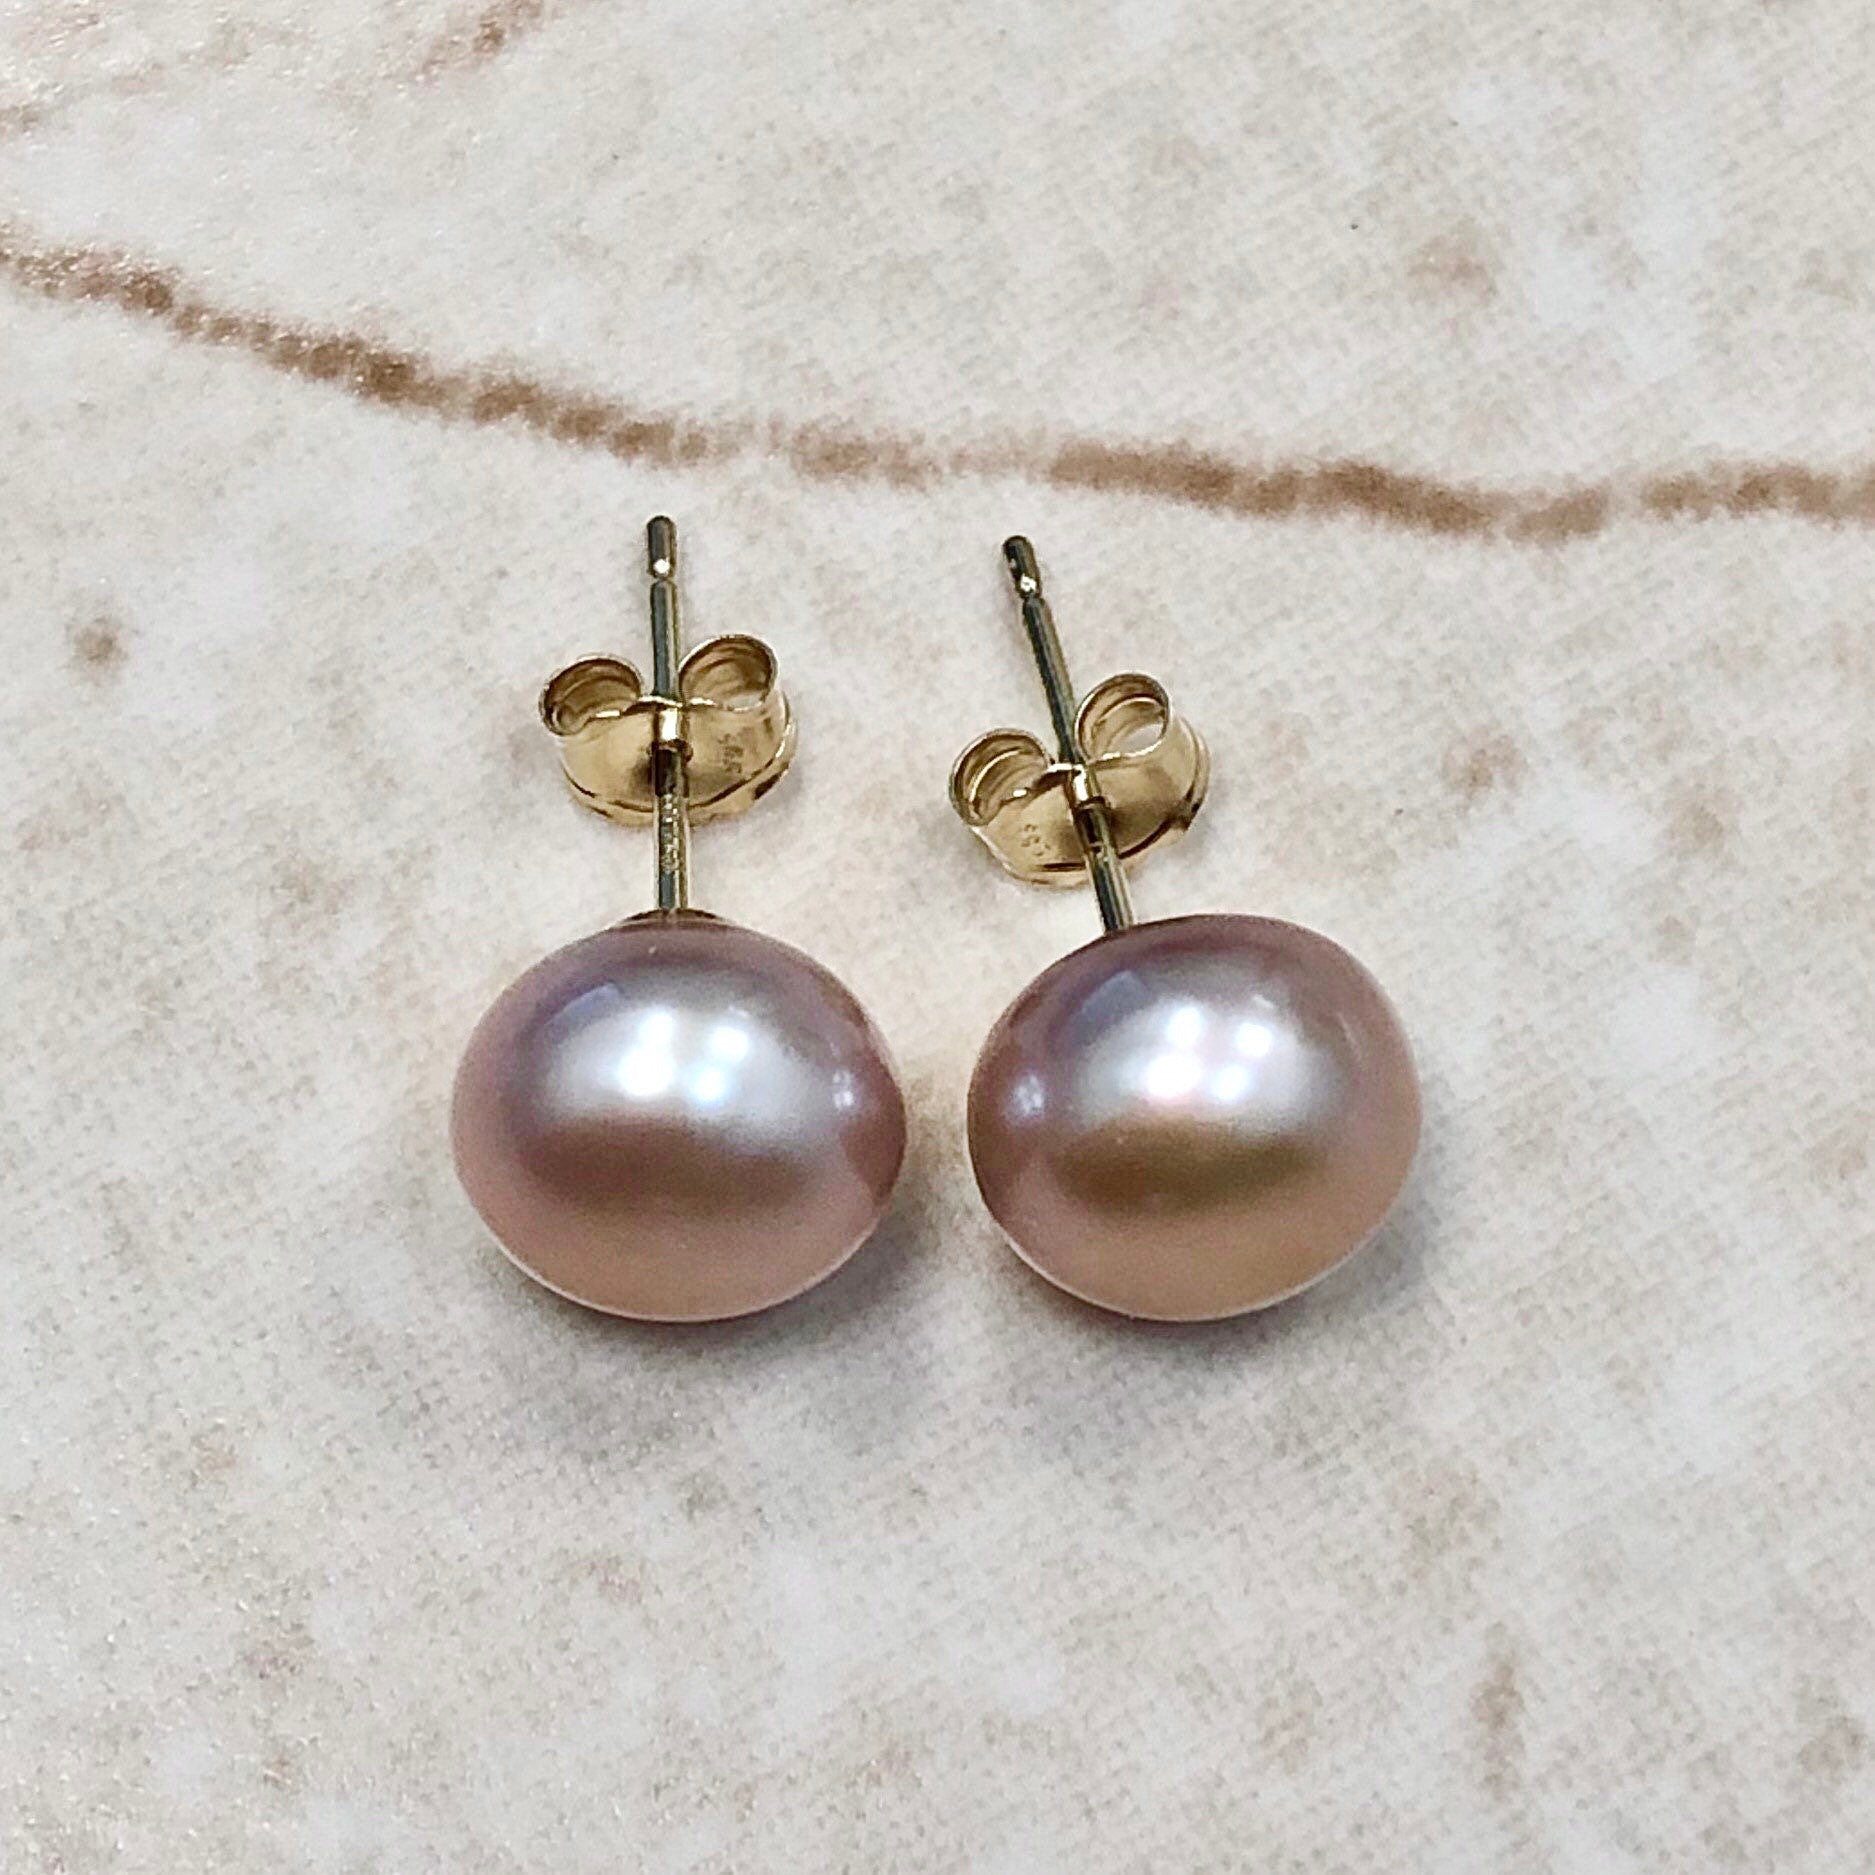 14K Pink Pearl Stud Earrings - Yellow Gold Pearl Earrings - Freshwater Button Pearls - Birthday Gift - June Birthstone - Best Gift For Her